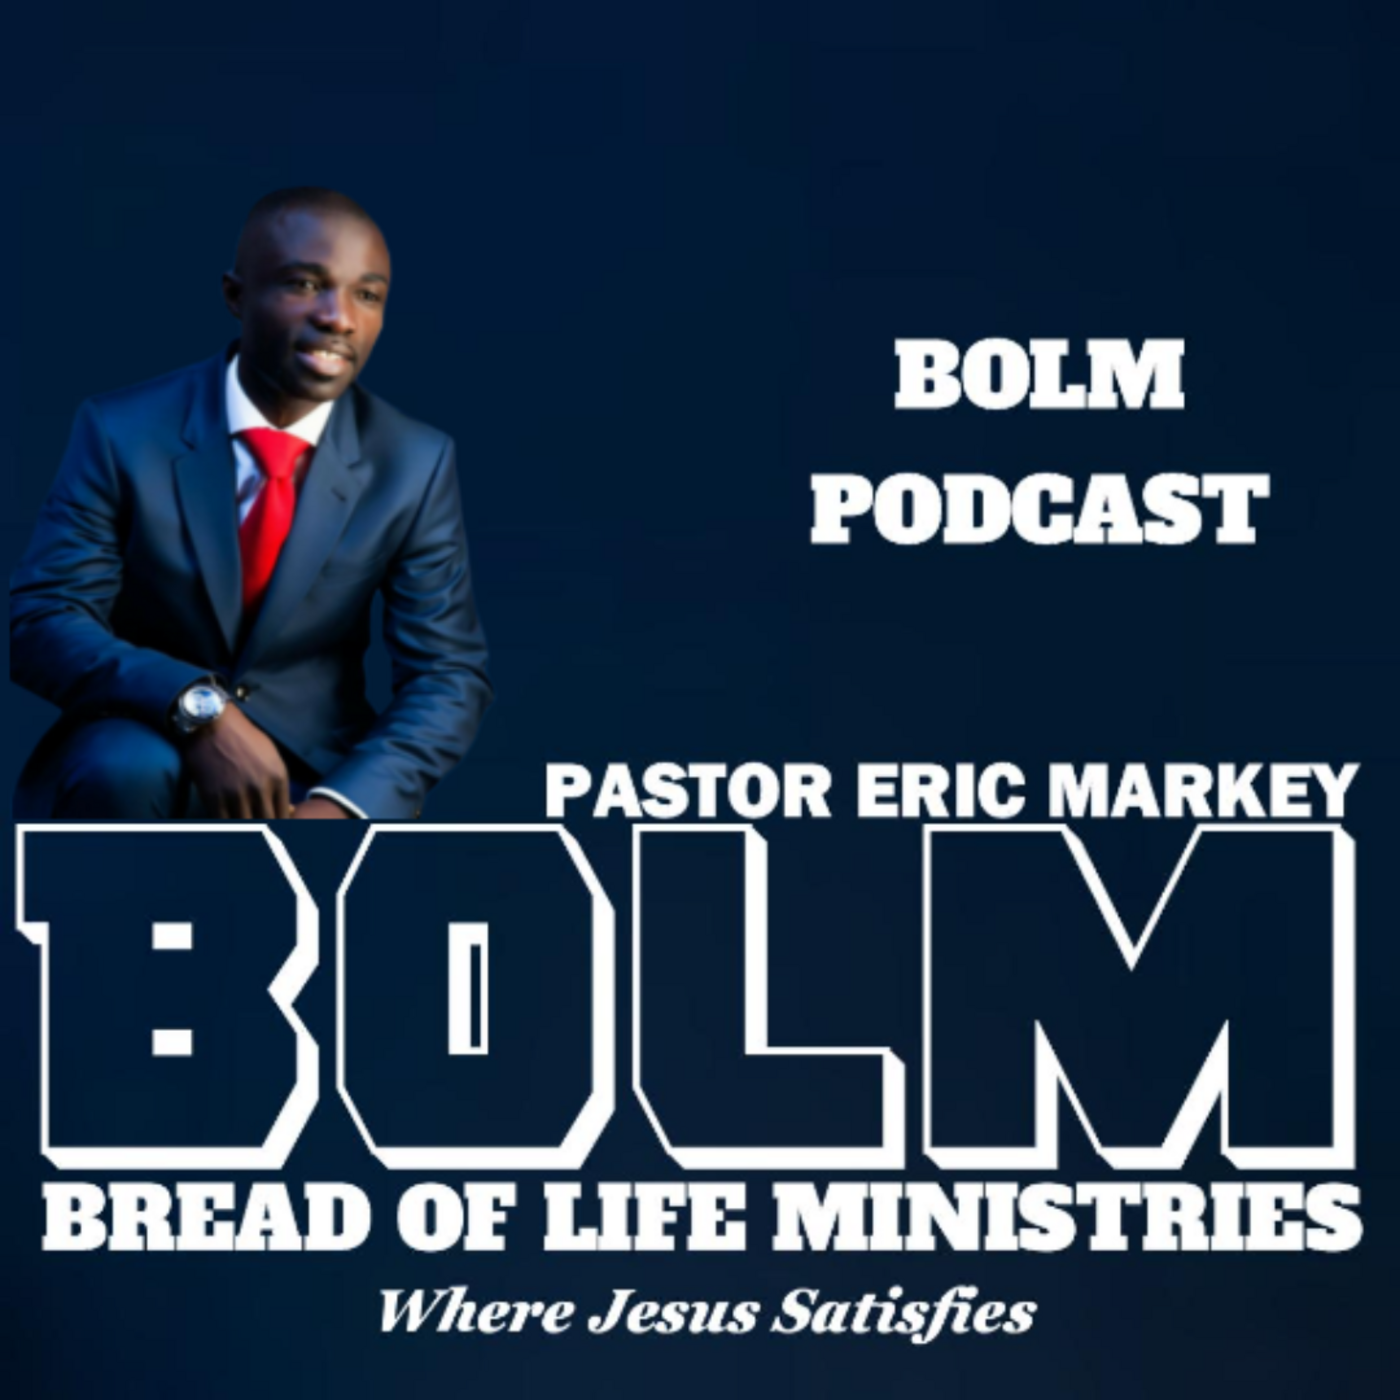 Episode 113: VICTORY AT THE CROSS | EASTER SUNDAY SERVICE WITH PASTOR ERIC MARKEY